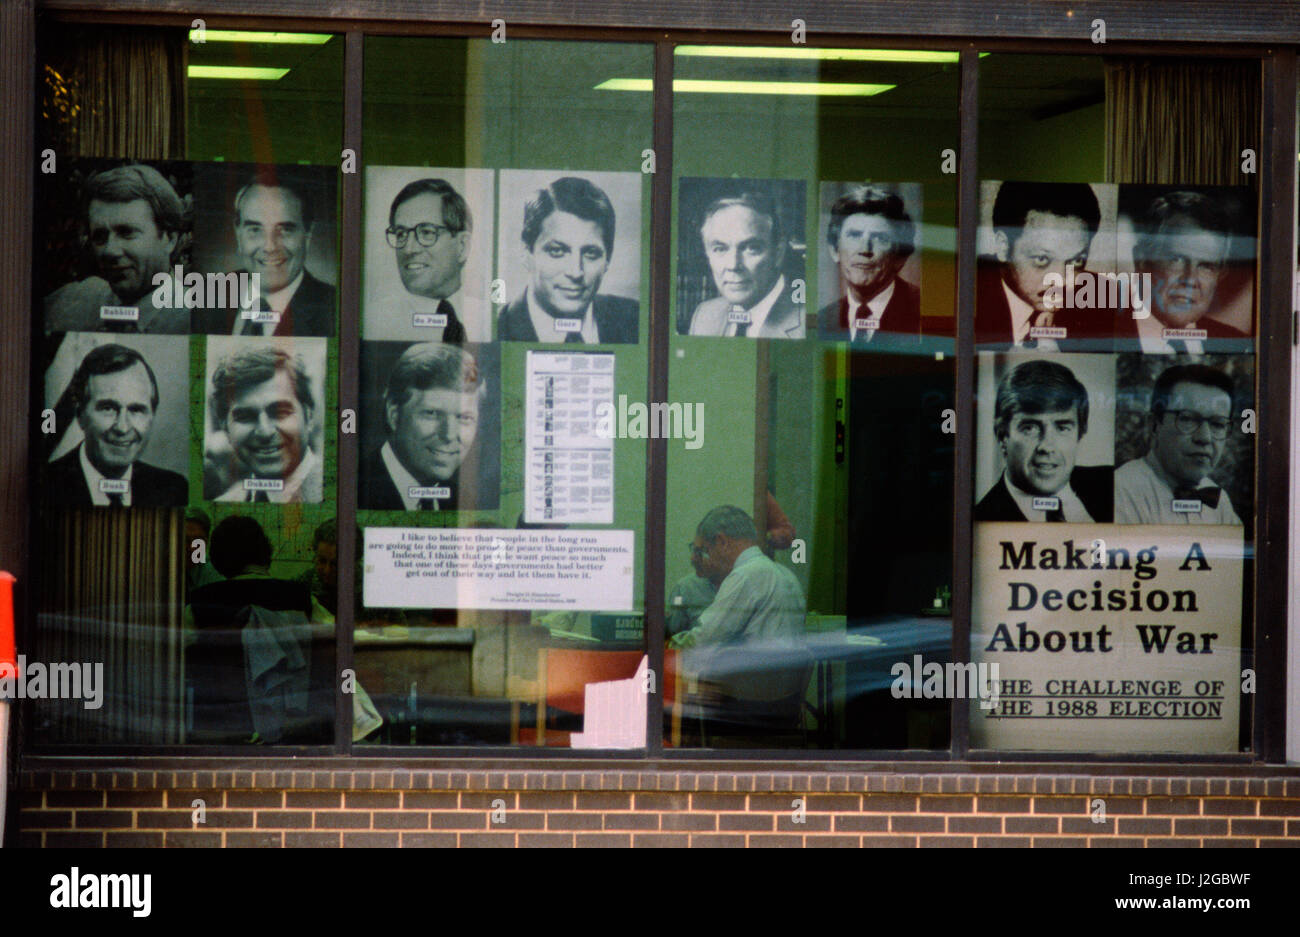 store-window-with-pictures-of-all-of-the-iowa-caucus-candidates-in-J2GBWF.jpg